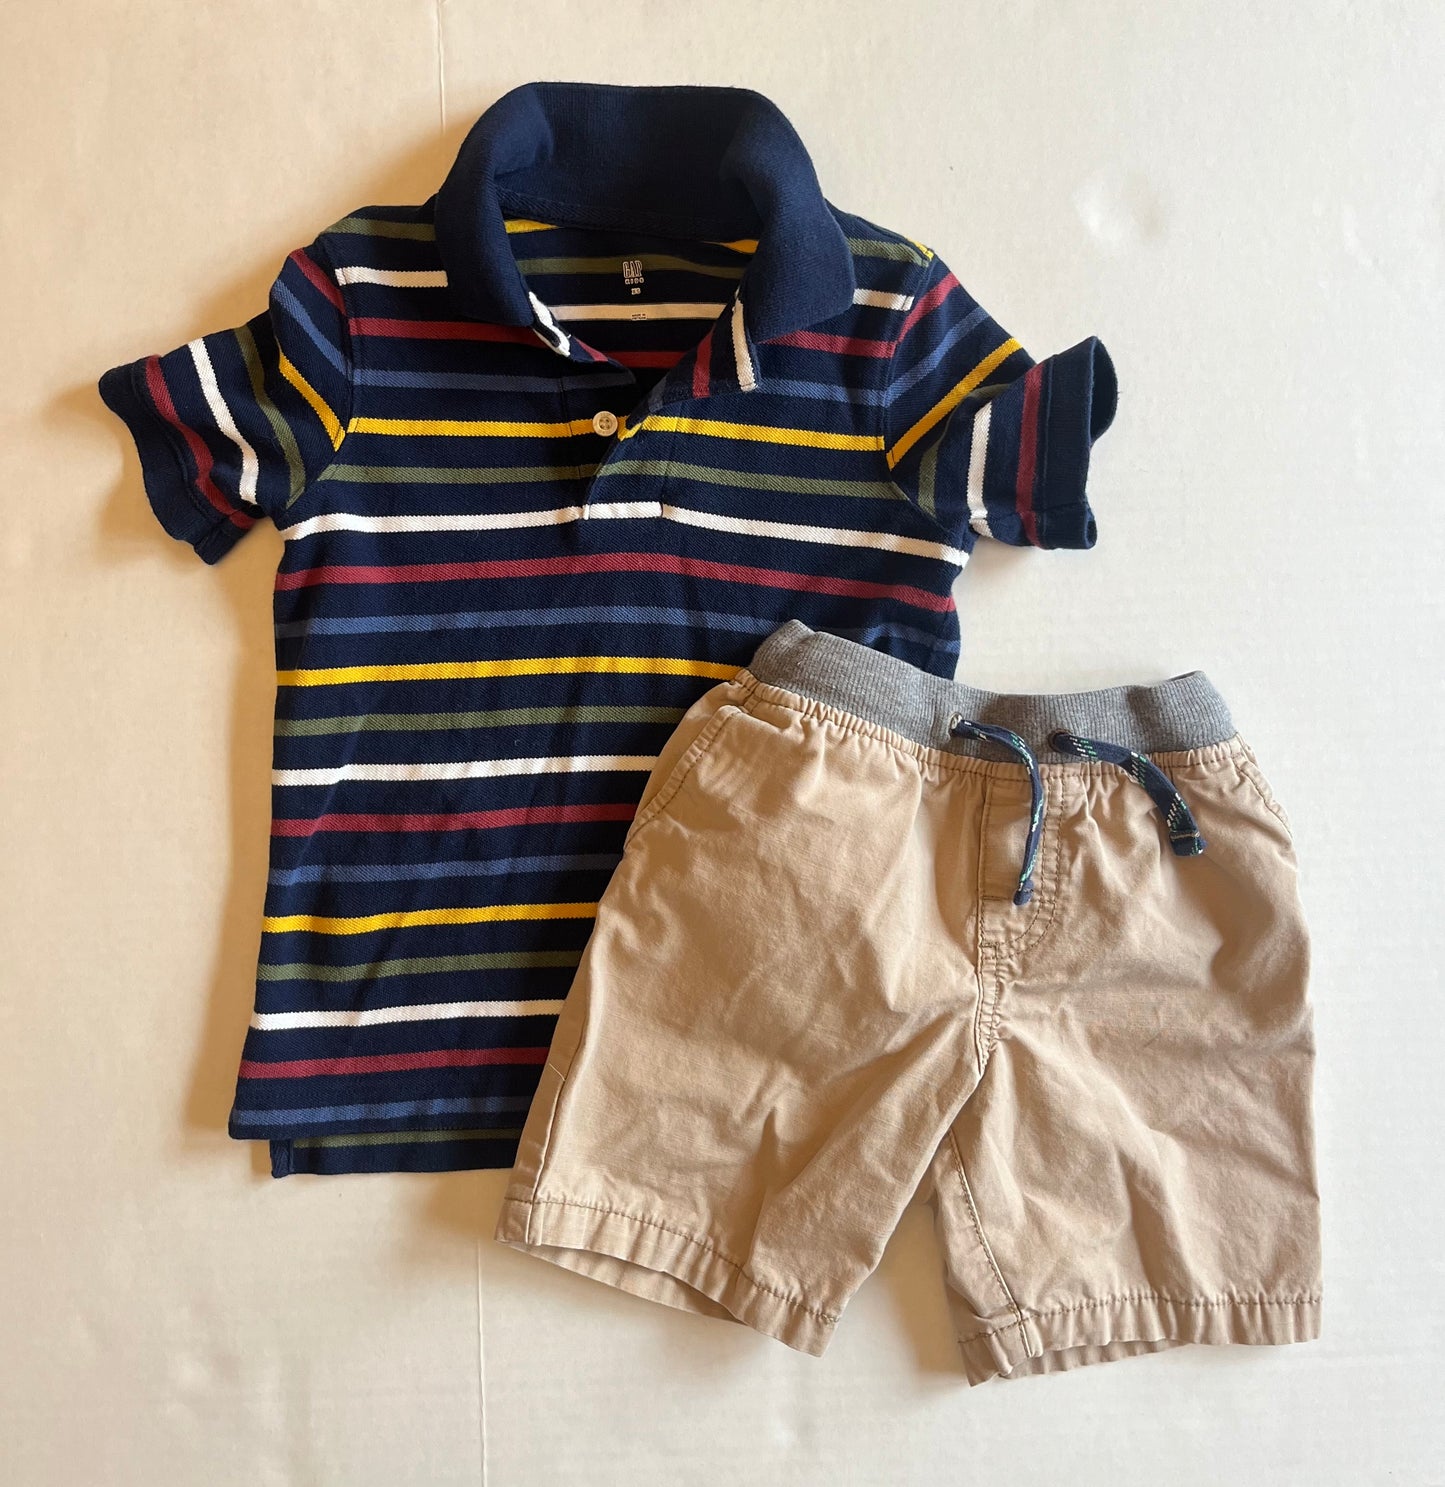 Reduced! Gap striped polo size xs (4/5) and Carter’s khaki shorts size 4T. PPU Mariemont